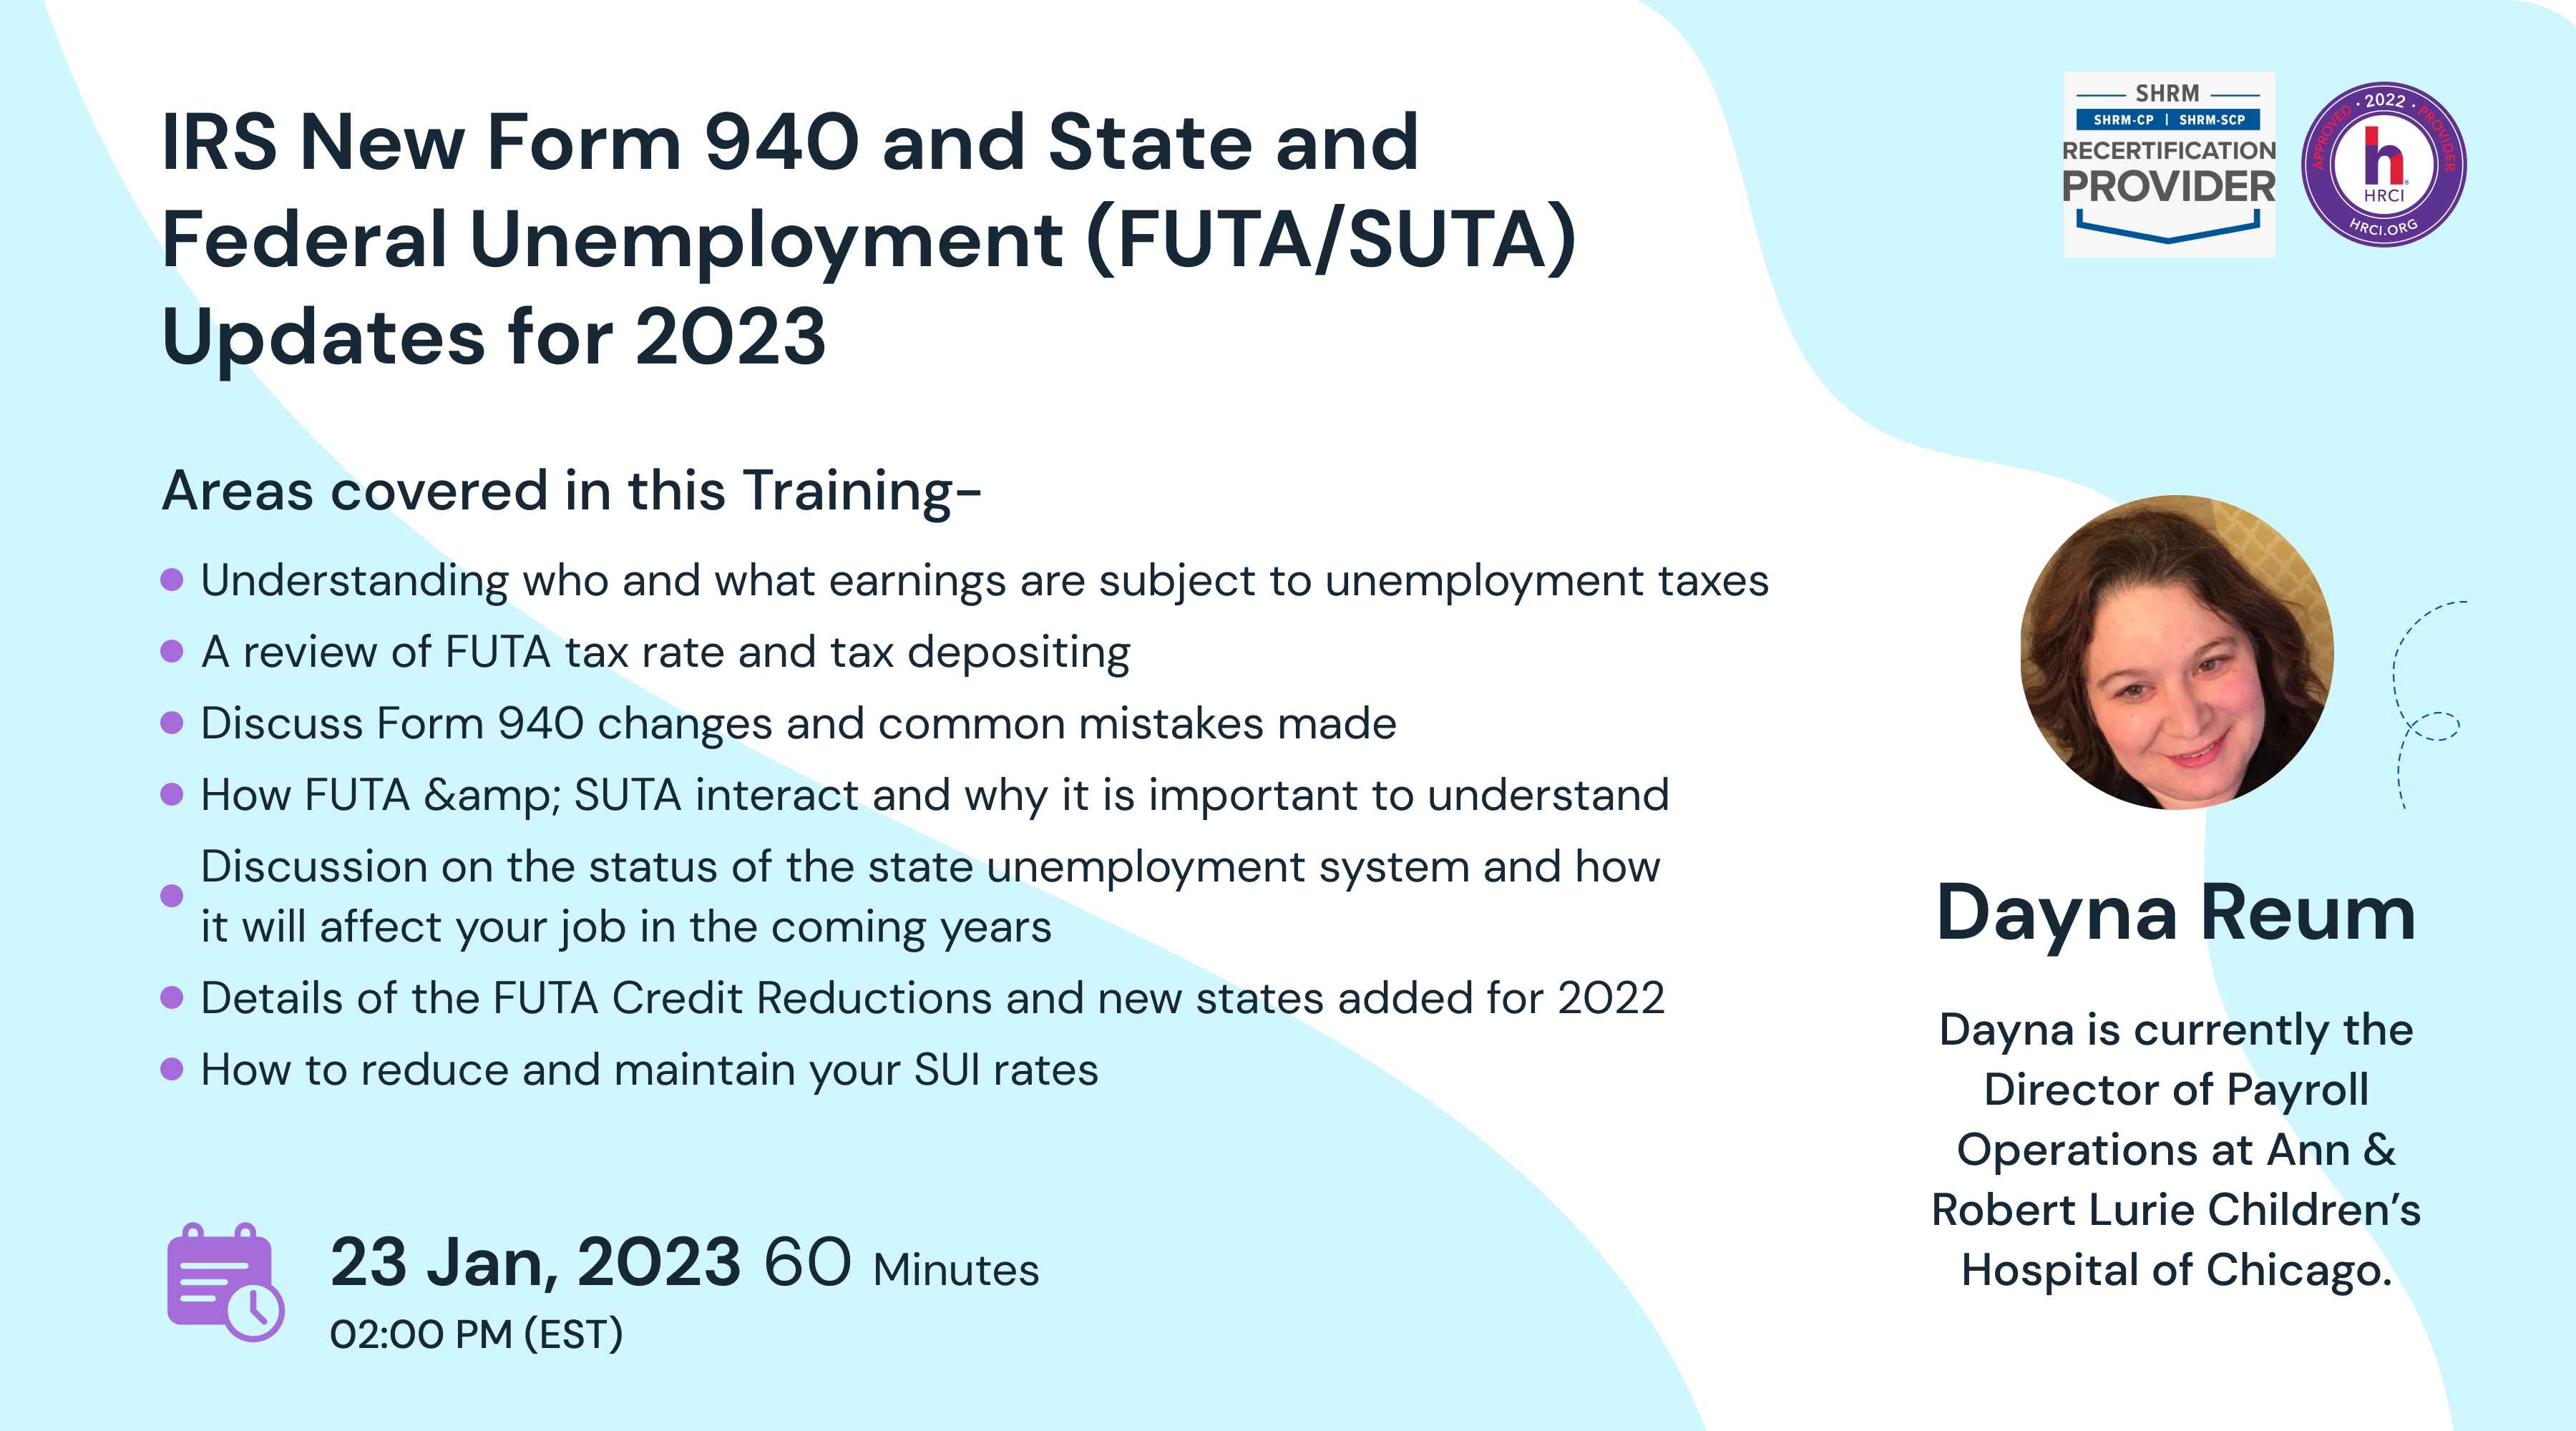 IRS New Form 940 and State and Federal Unemployment (FUTA/SUTA) Updates